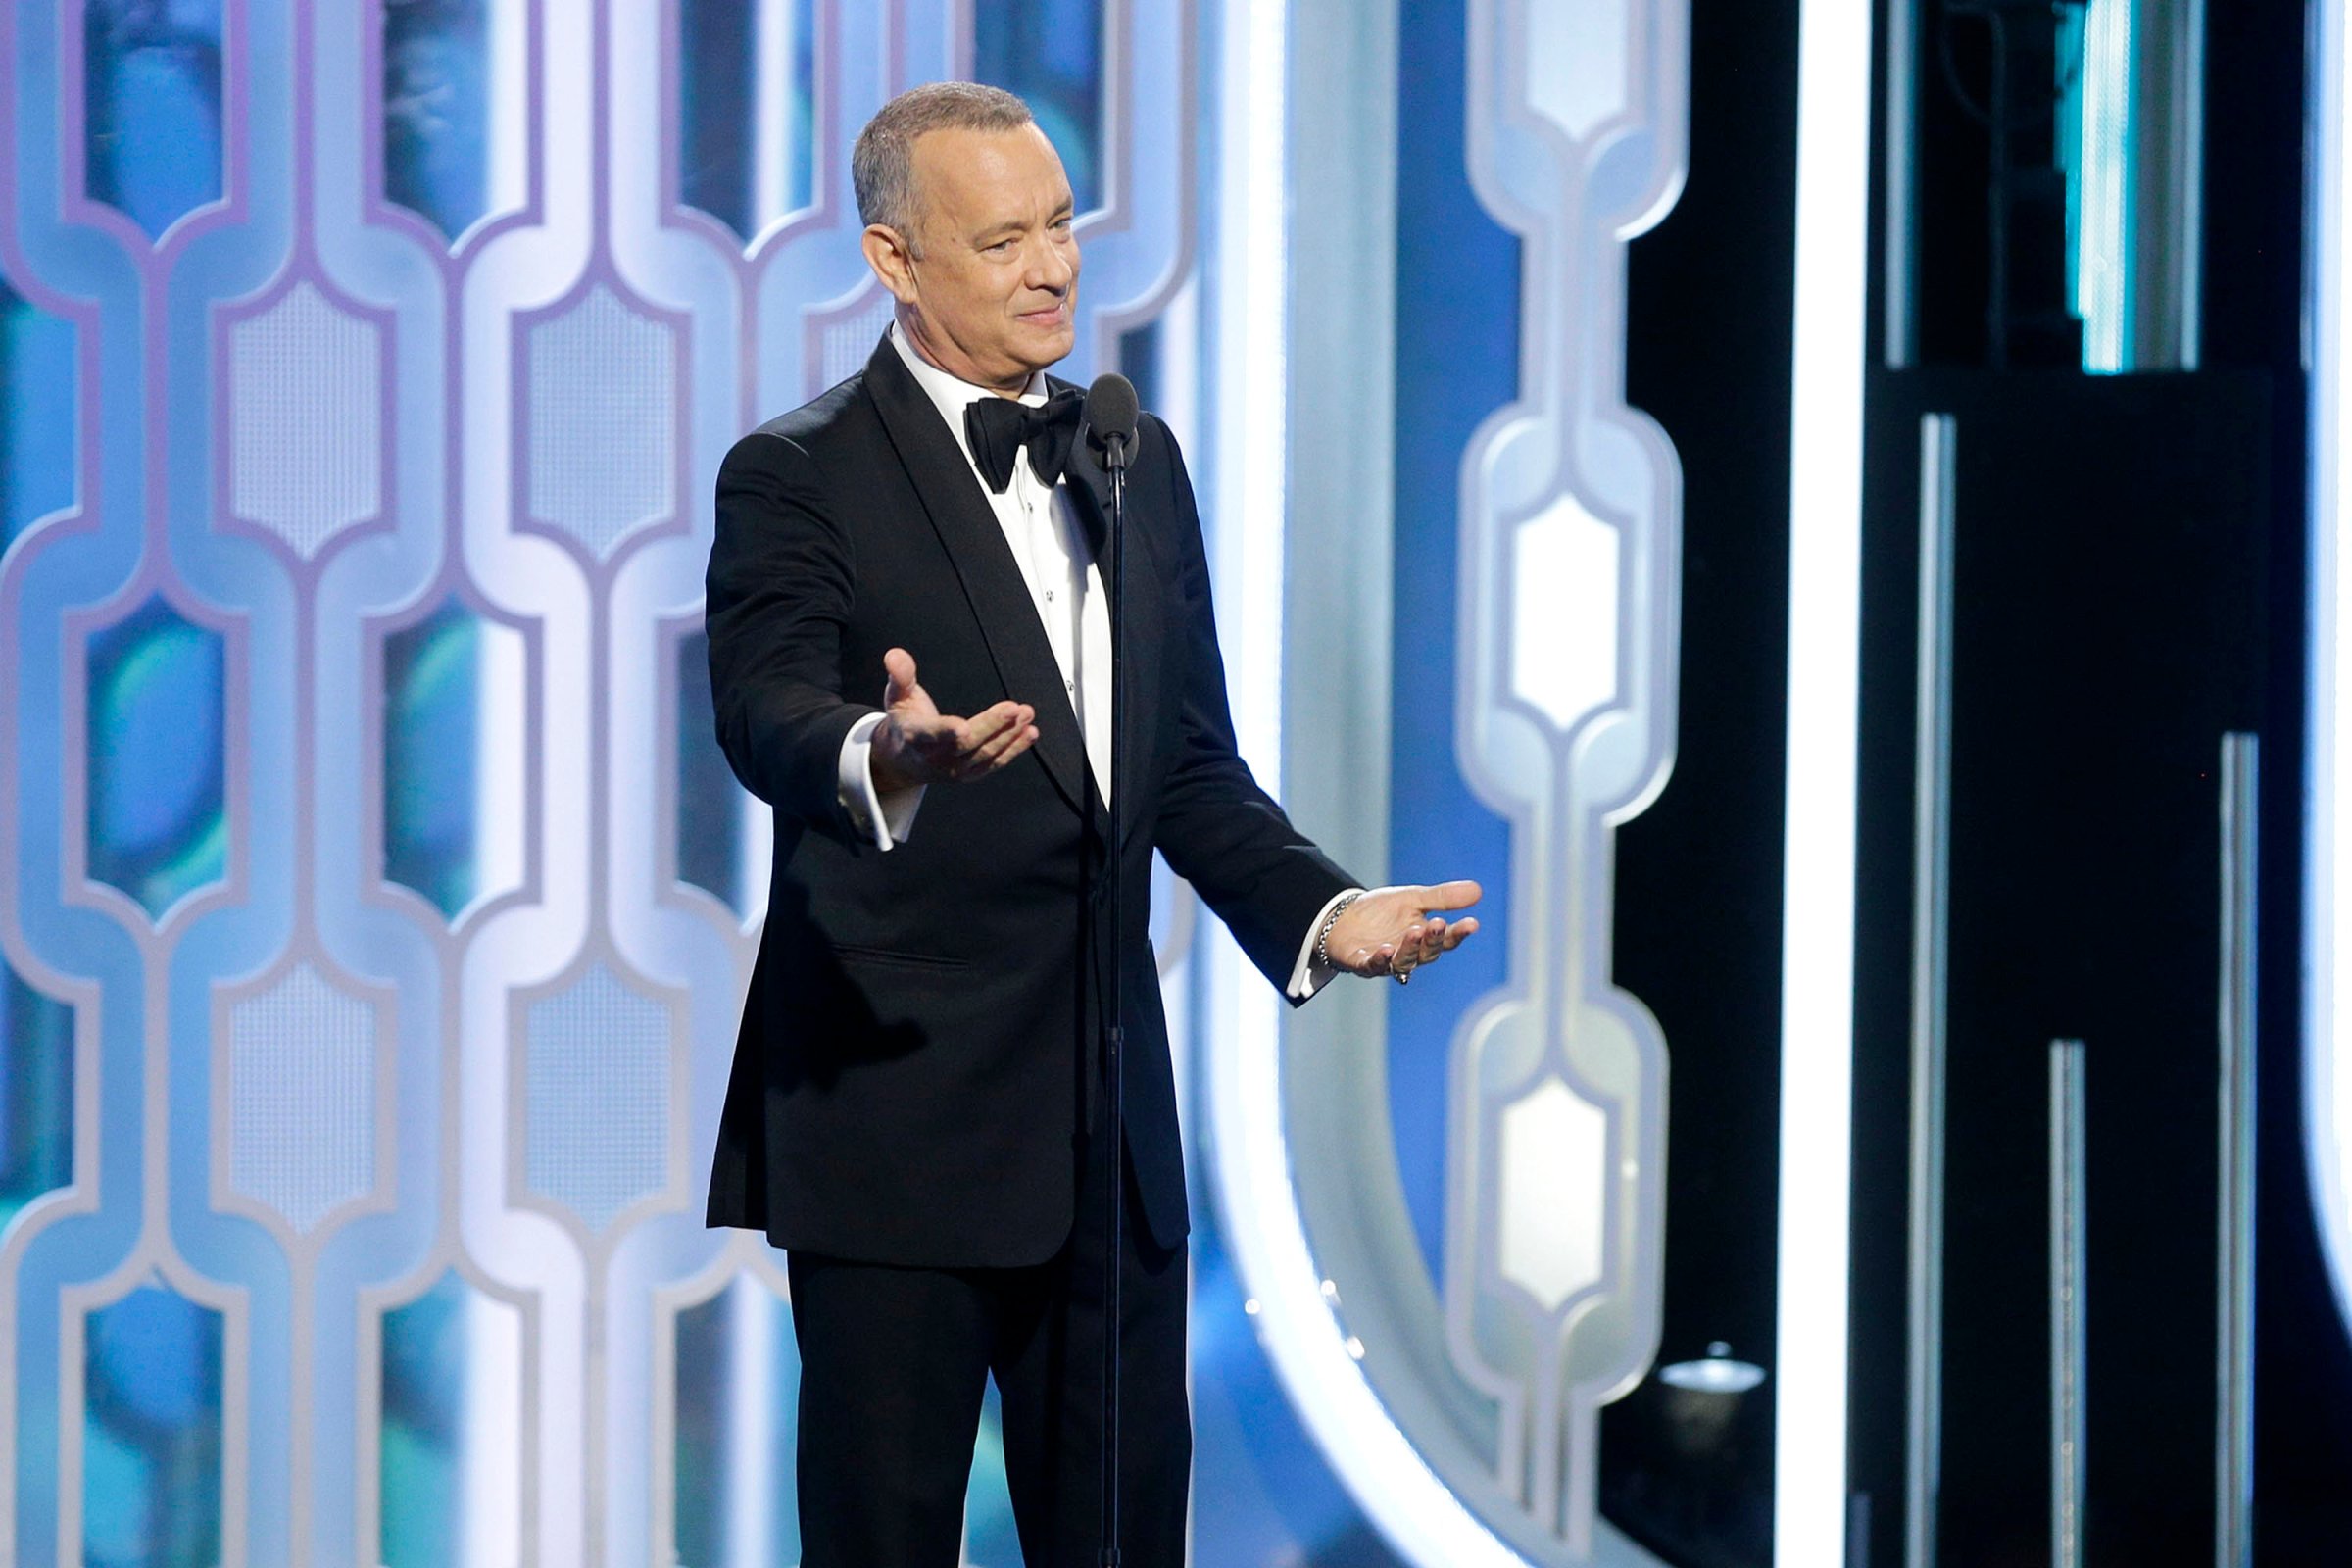 In this handout photo provided by NBCUniversal, Presenter Tom Hanks speaks onstage during the 73rd Annual Golden Globe Awards at The Beverly Hilton Hotel on Jan. 10, 2016 in Beverly Hills, California.